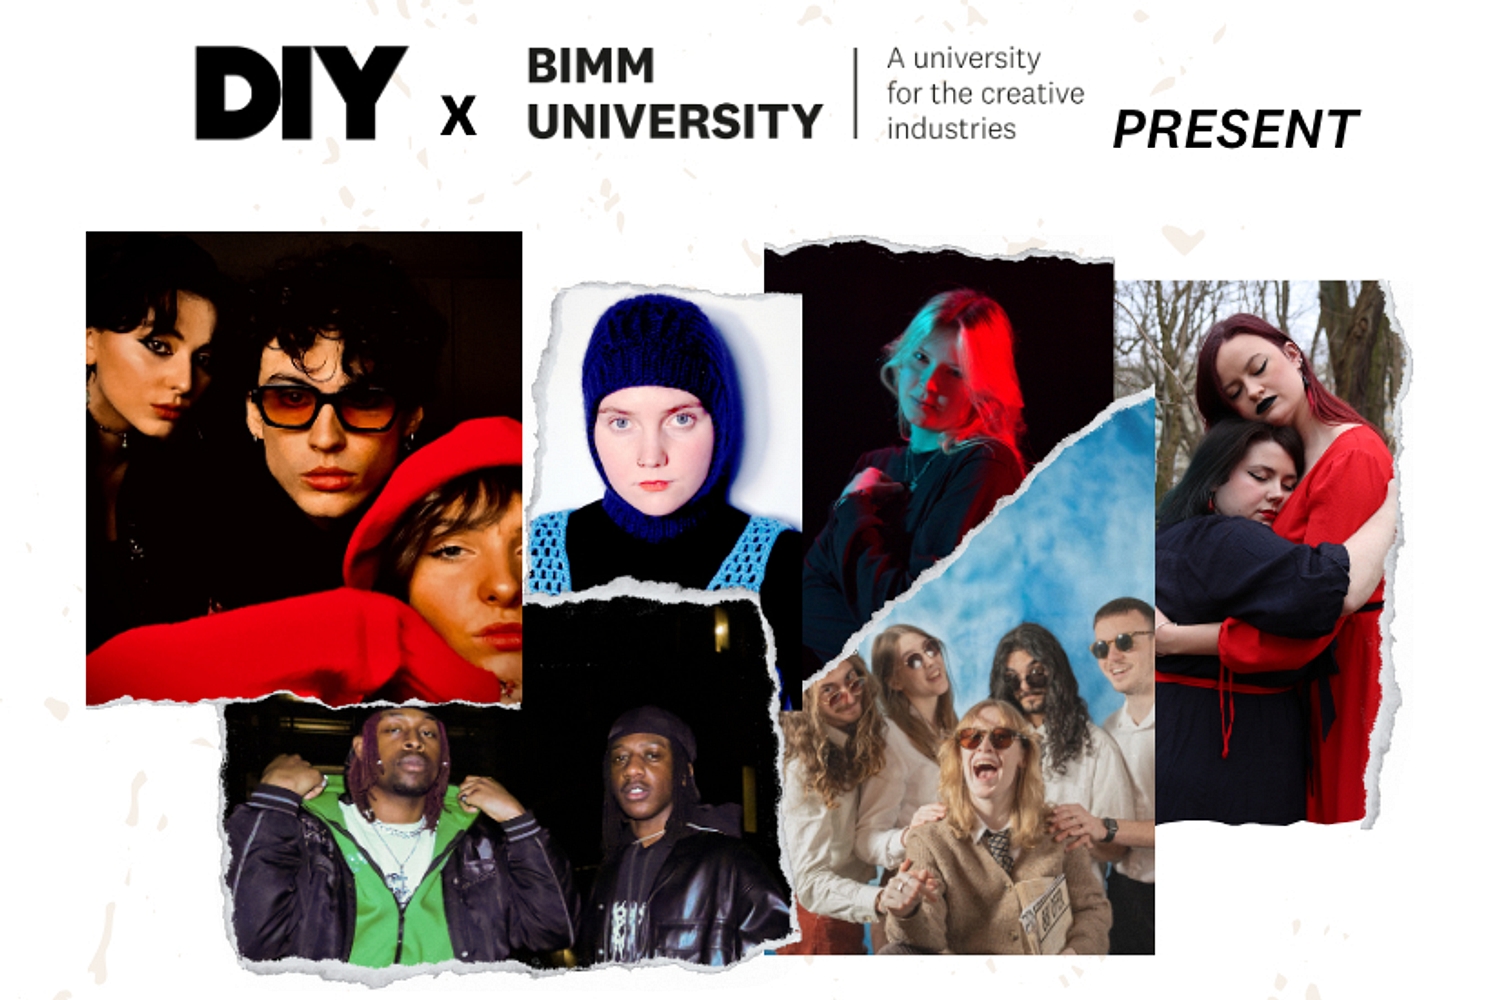 DIY partners with BIMM University for The Great Escape events programme